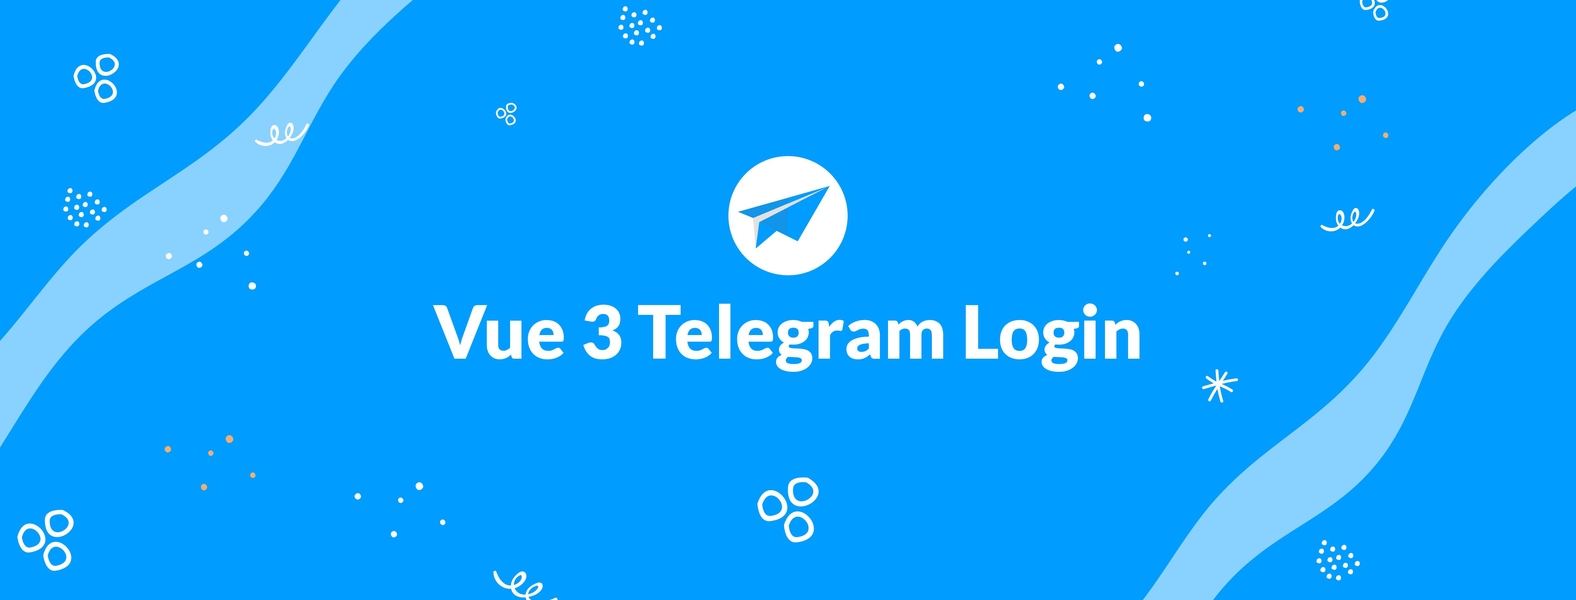 A Simple Telegram Login Component Made with Vue Js cover image